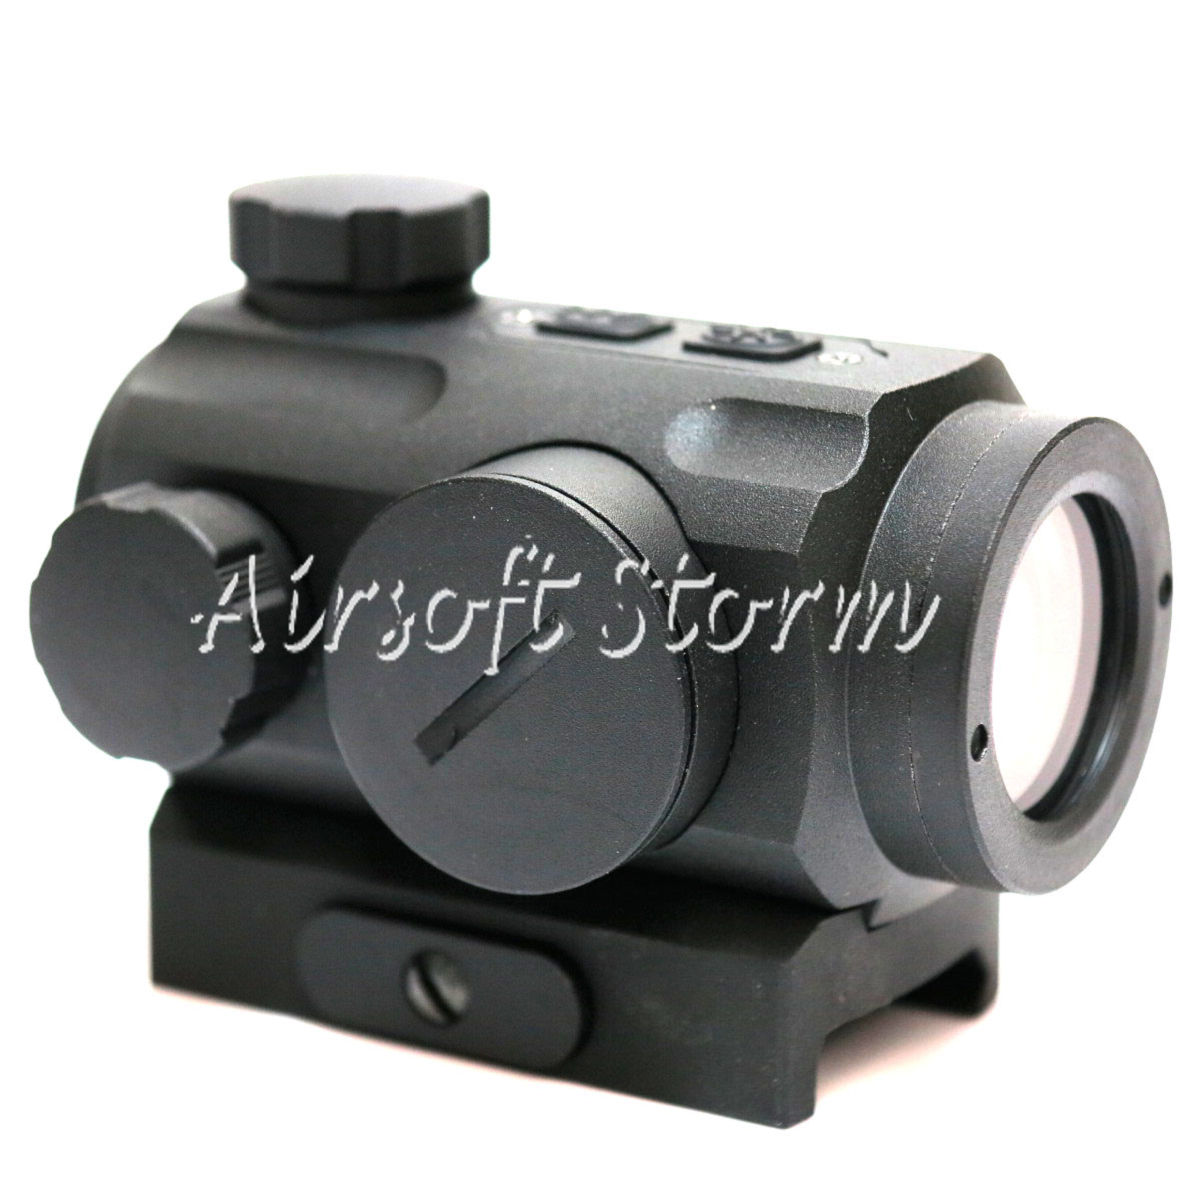 SWAT Gear Tactical 1x20 Micro T-1 Red Green Dot Sight Scope with QD Low Mount